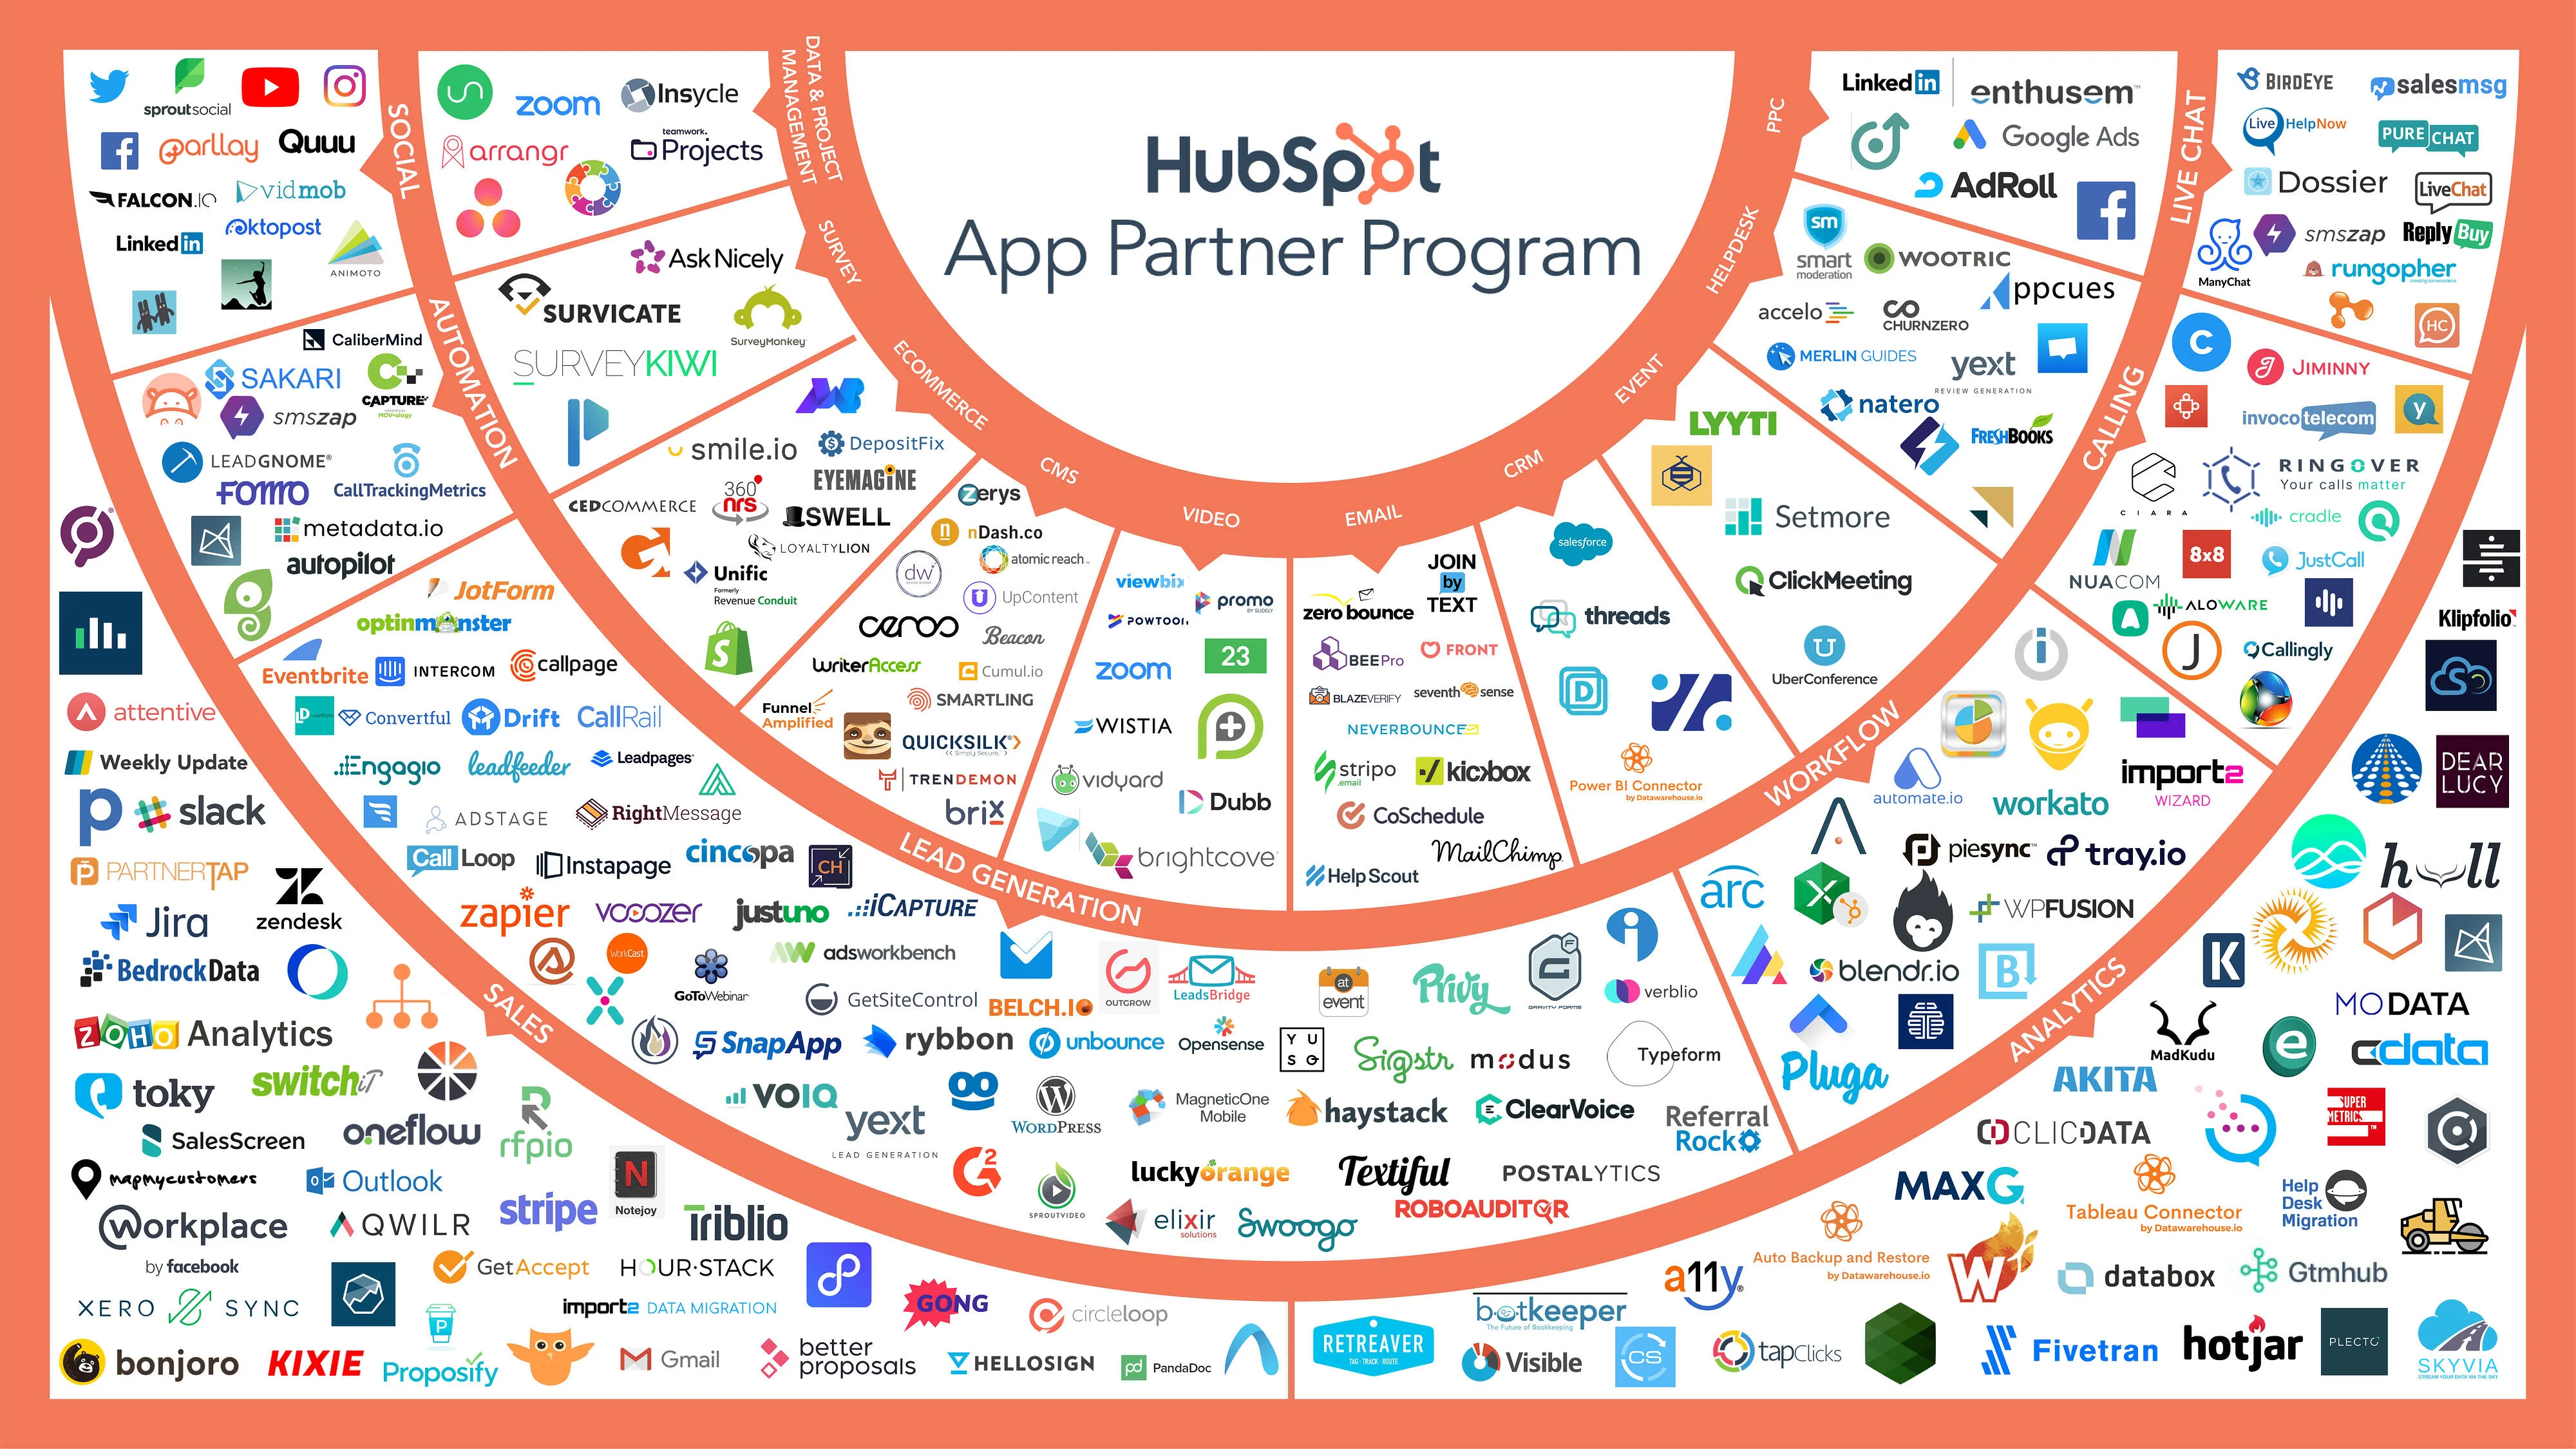 HubspotConnectionGraph_revised-01 (3)